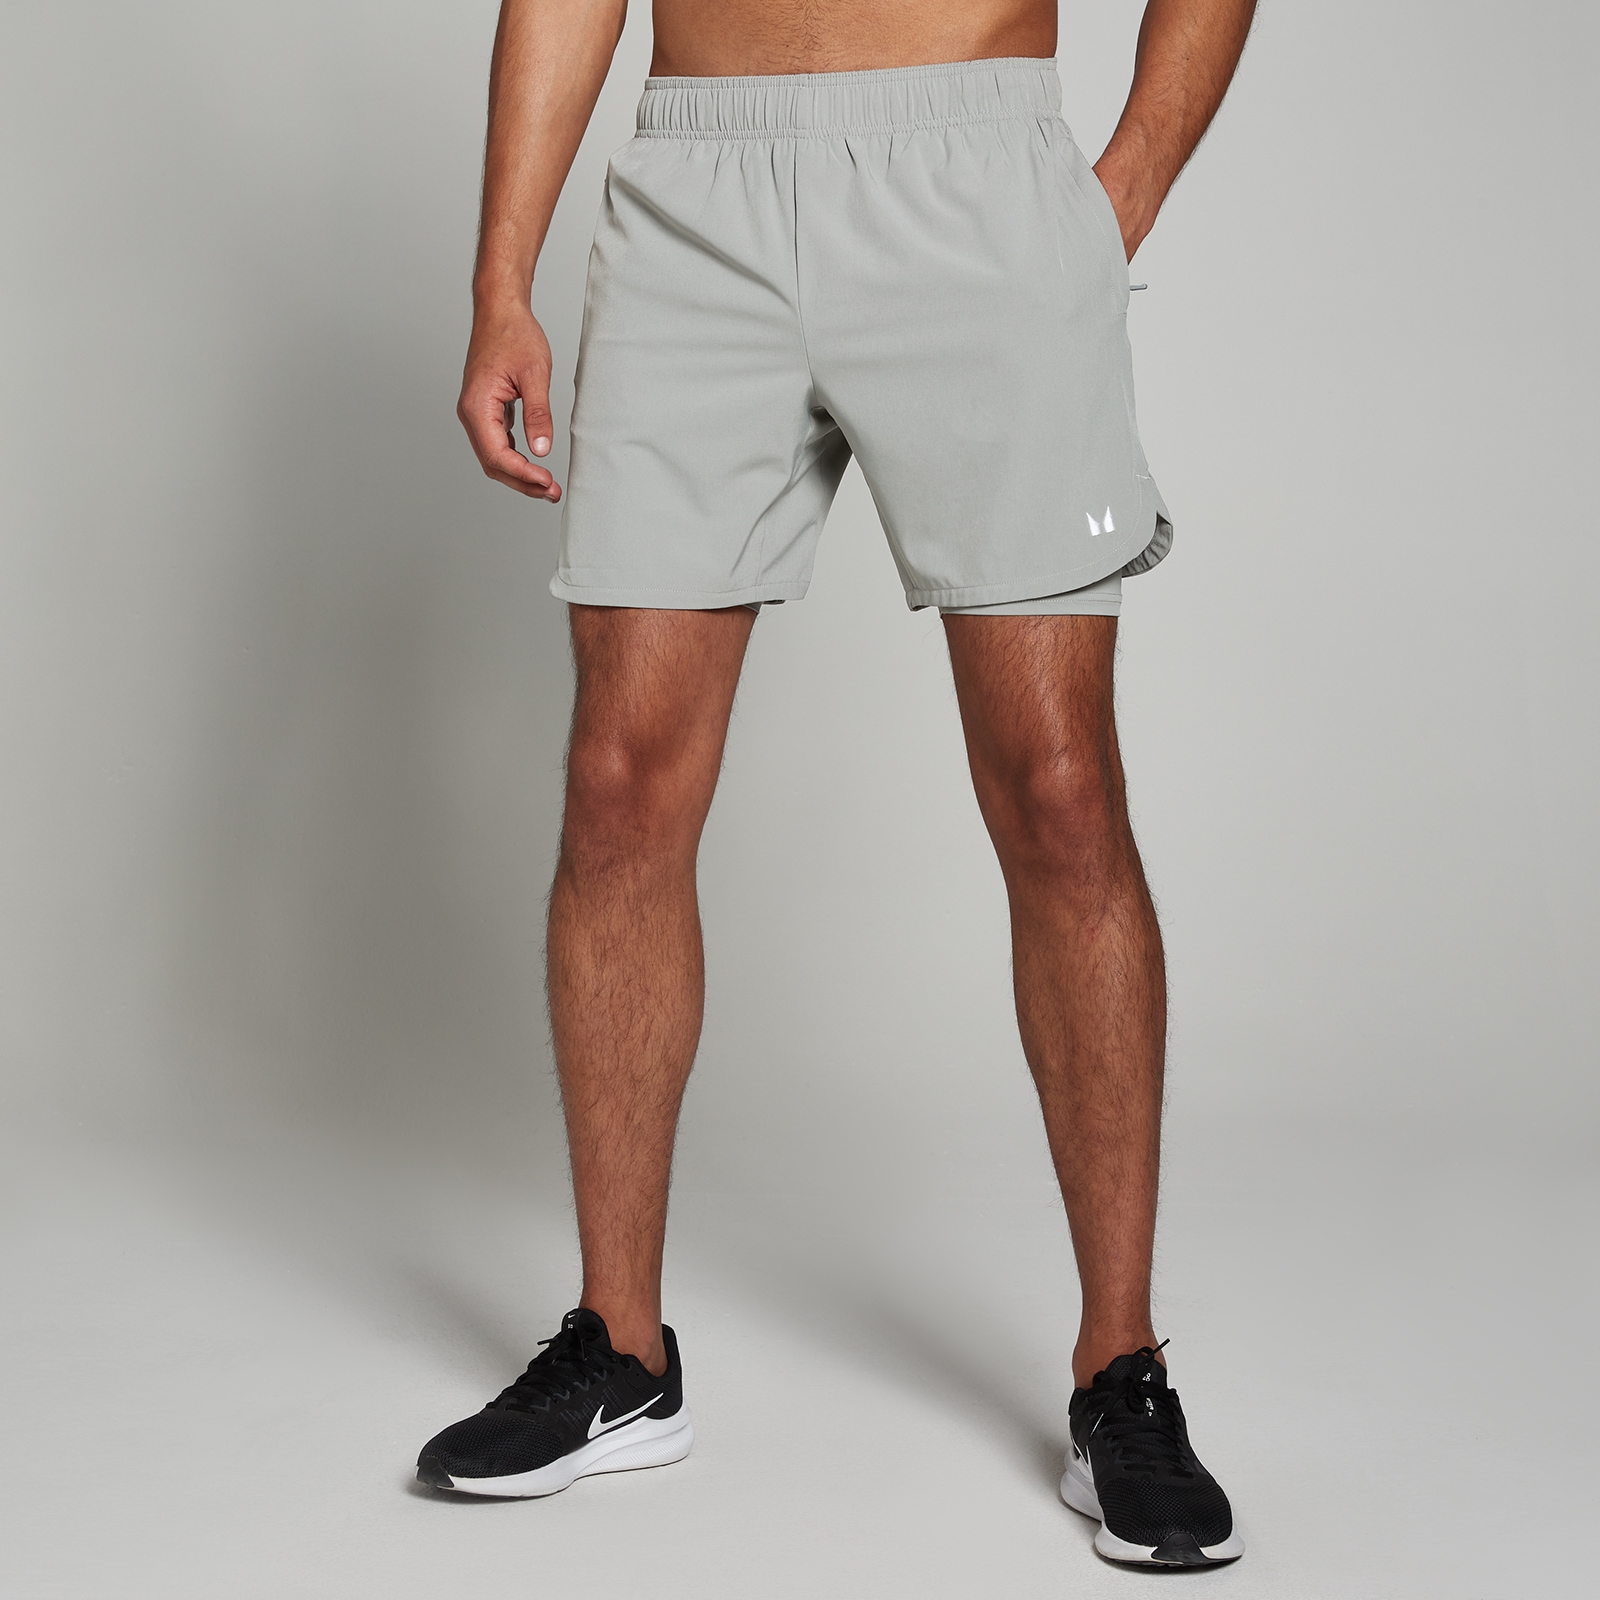 MP Men's 2-in-1 Training Shorts - Storm - S